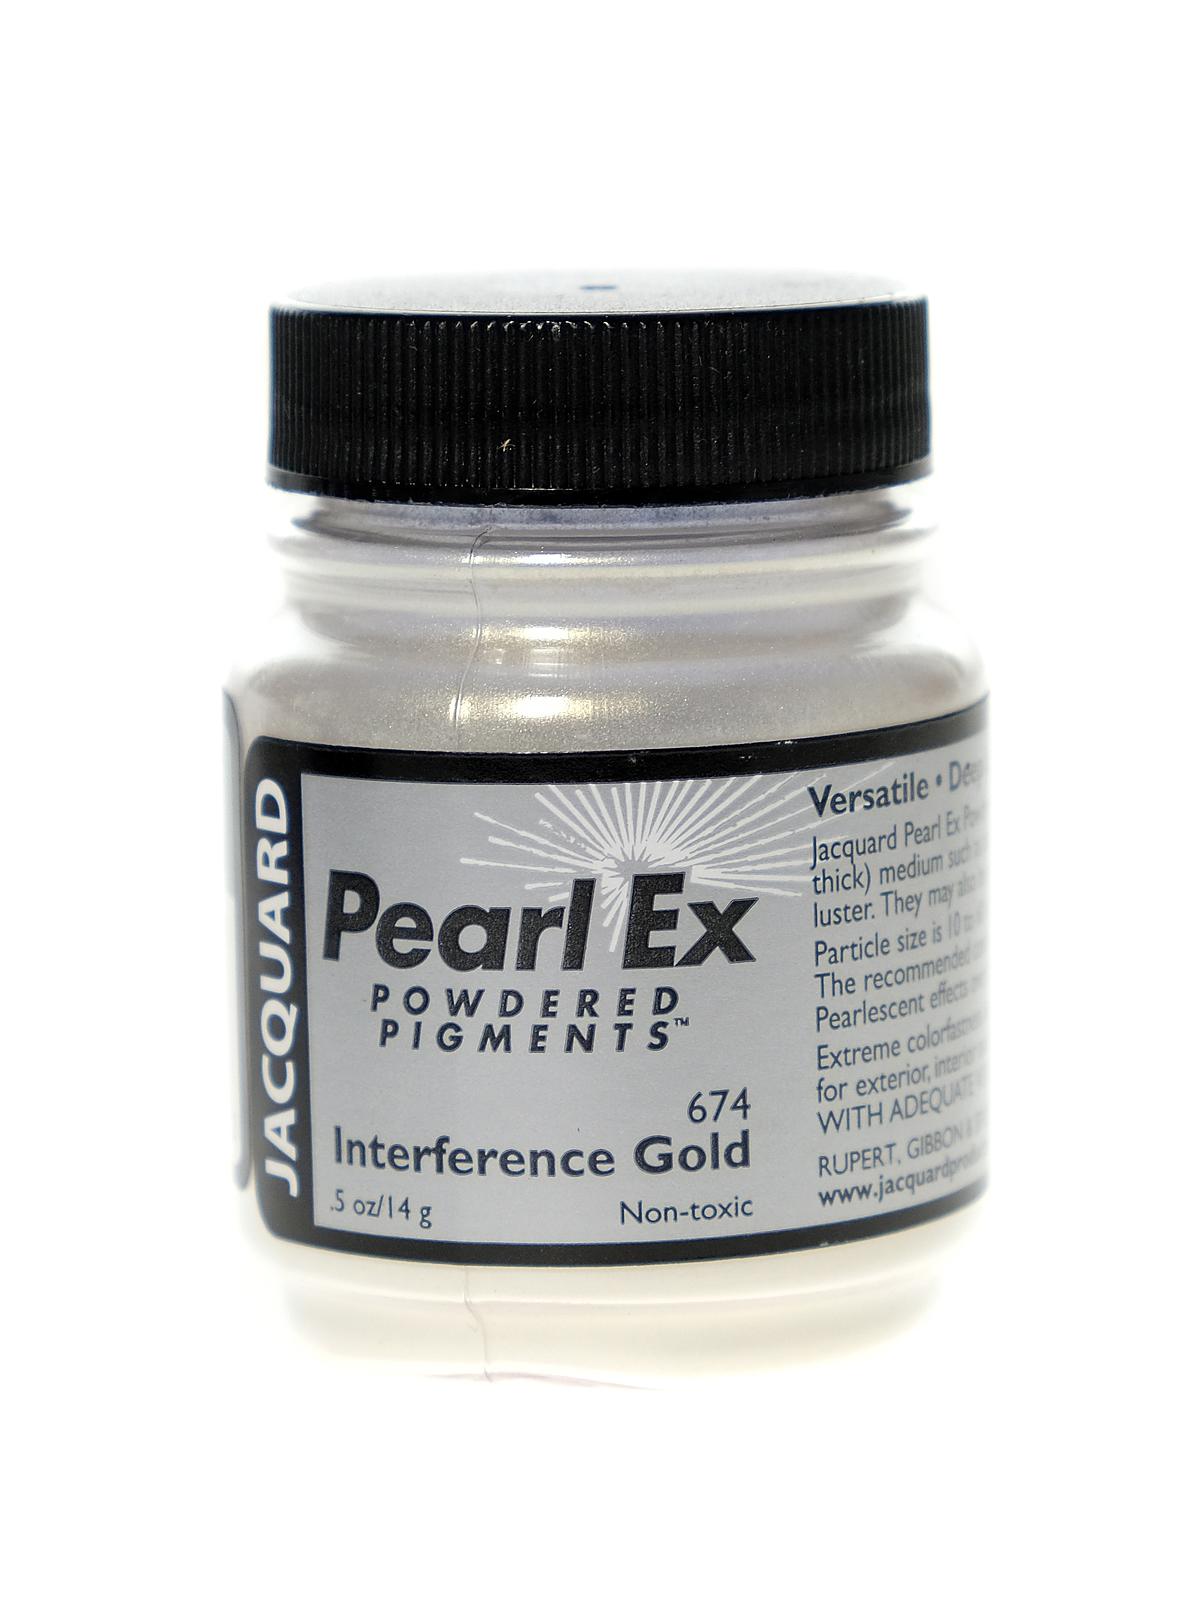 Pearl Ex Powdered Pigments Interference Gold 0.50 Oz.